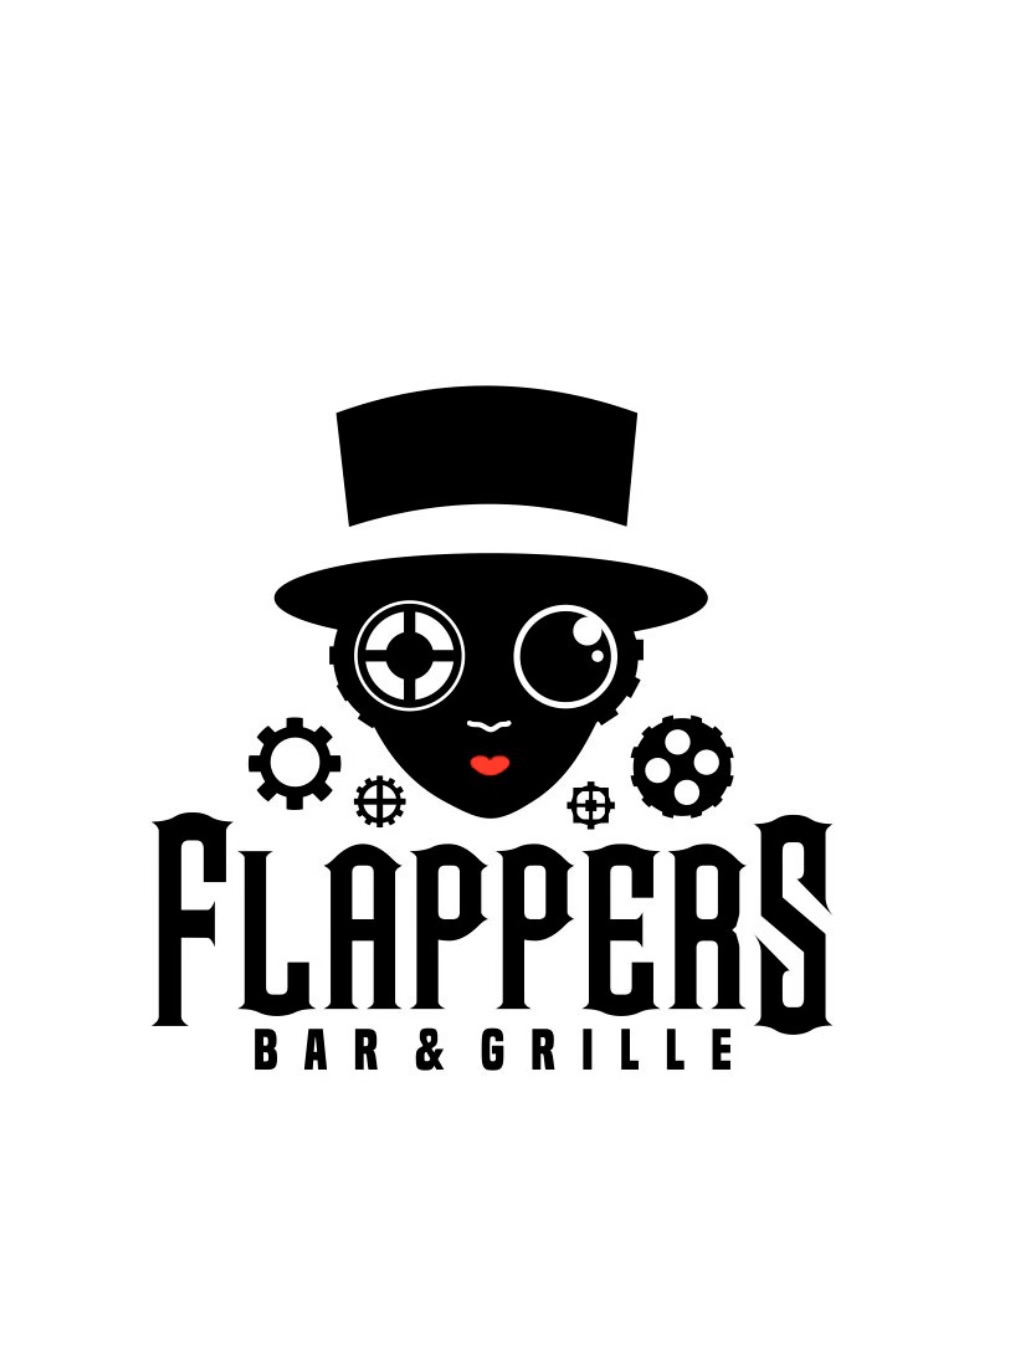 flappers bar and grille